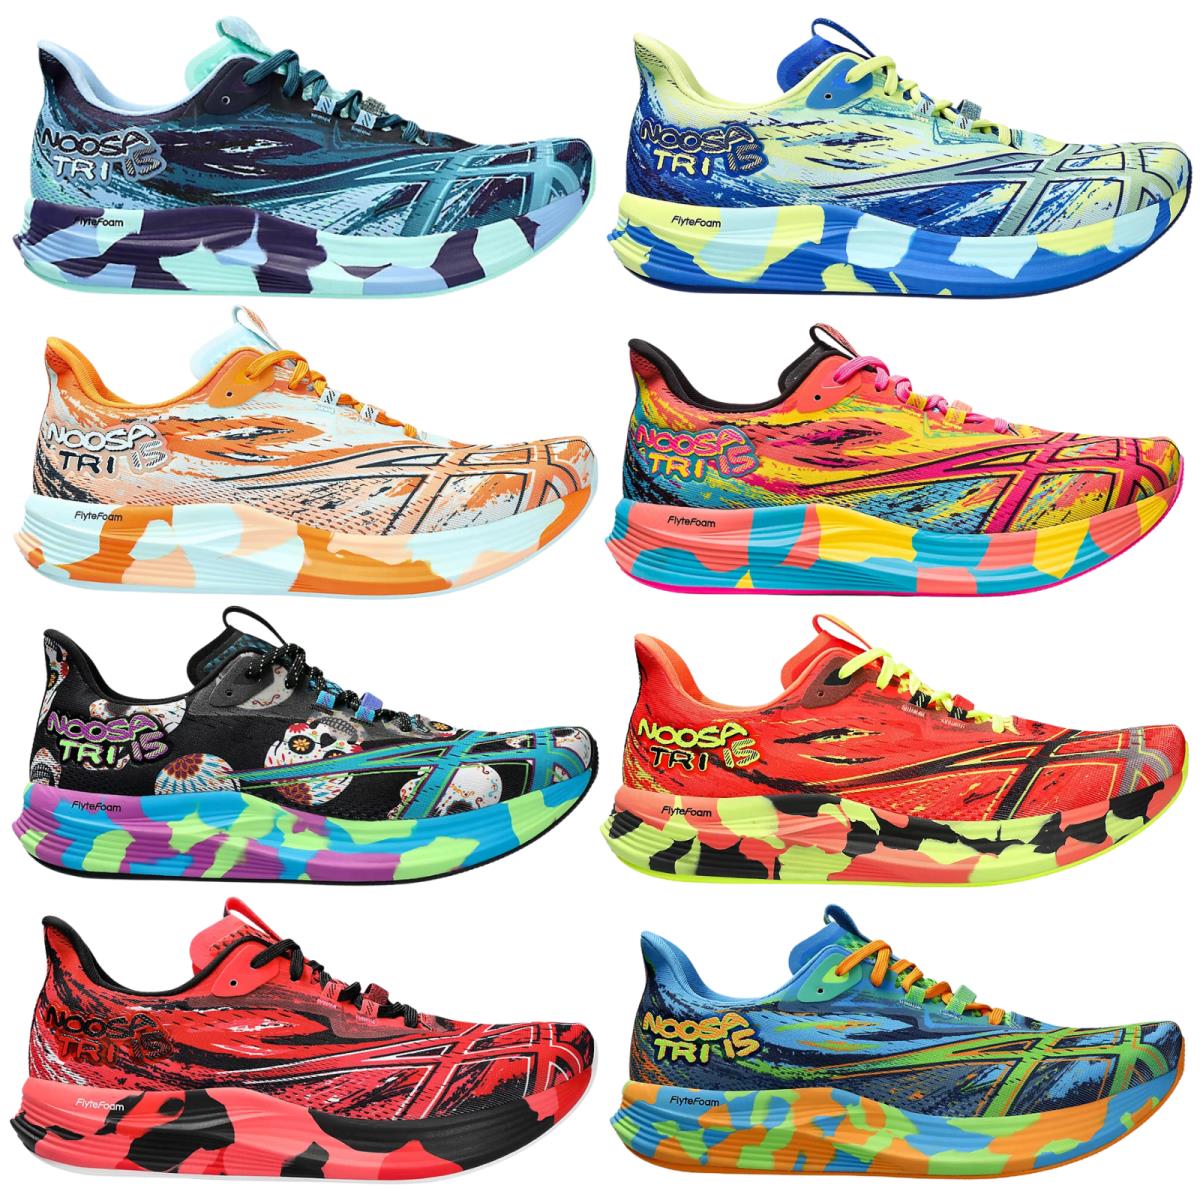 Men`s Asics Noosa TRI-15 Running Shoes All Colors US Sizes 7-14